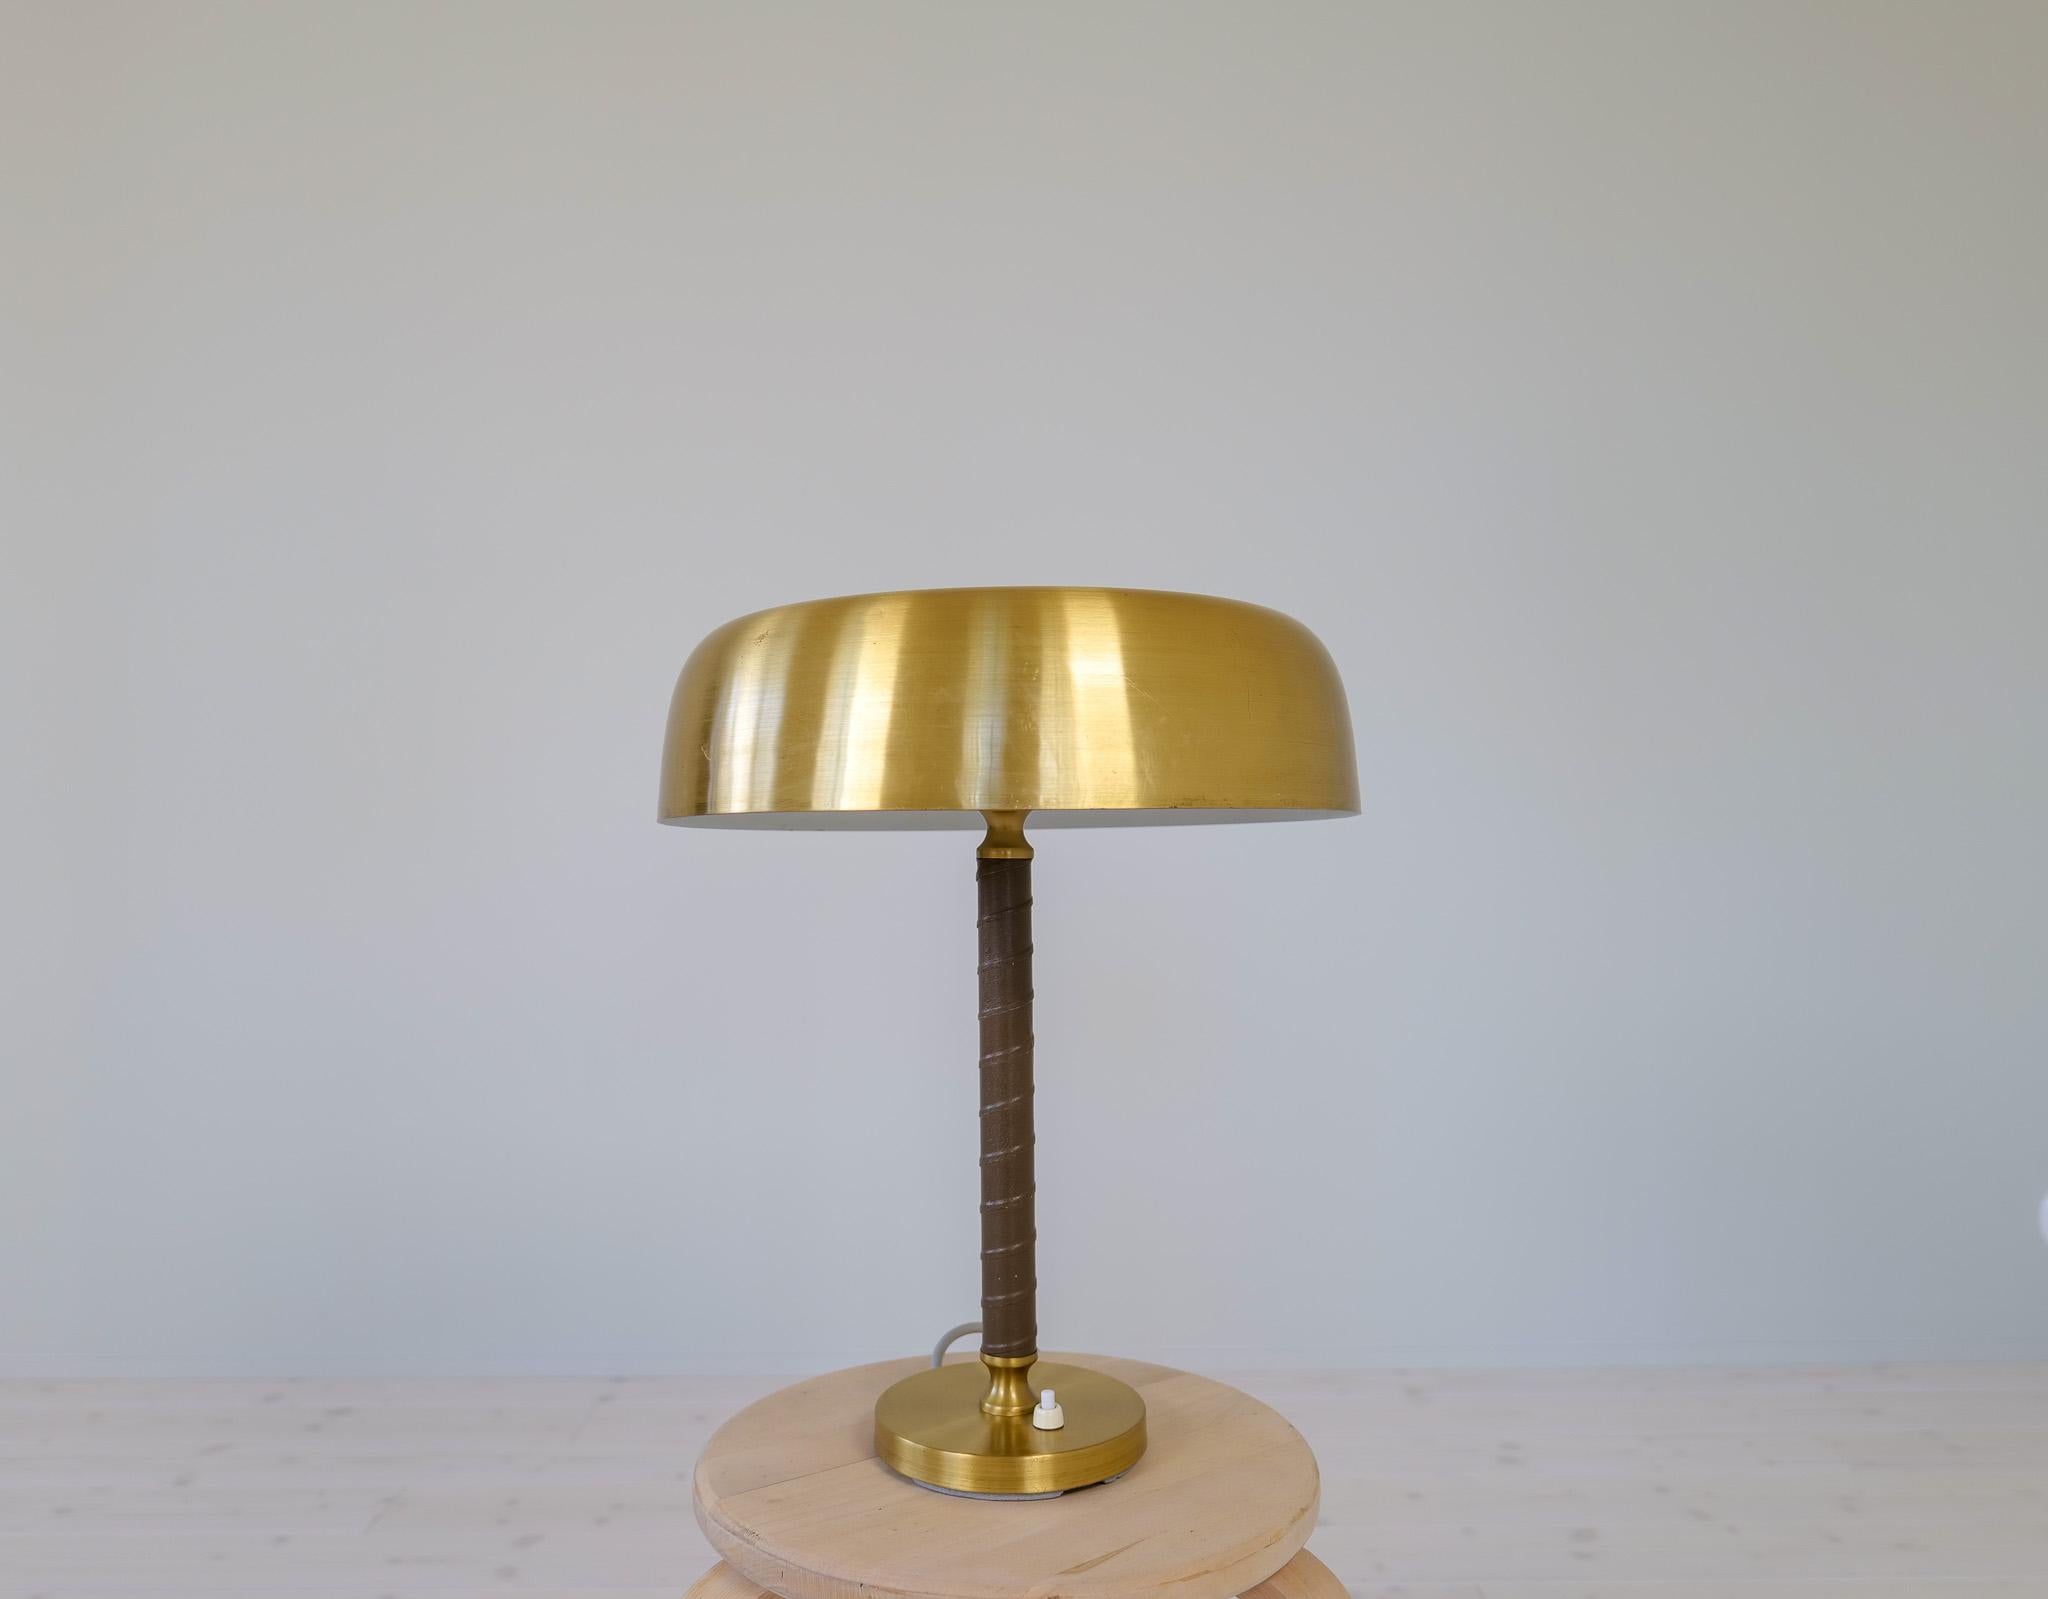 Scandinavian Modern Midcentury Modern Table Lamp in Brass and Leather by Boréns, Sweden, 1960s For Sale